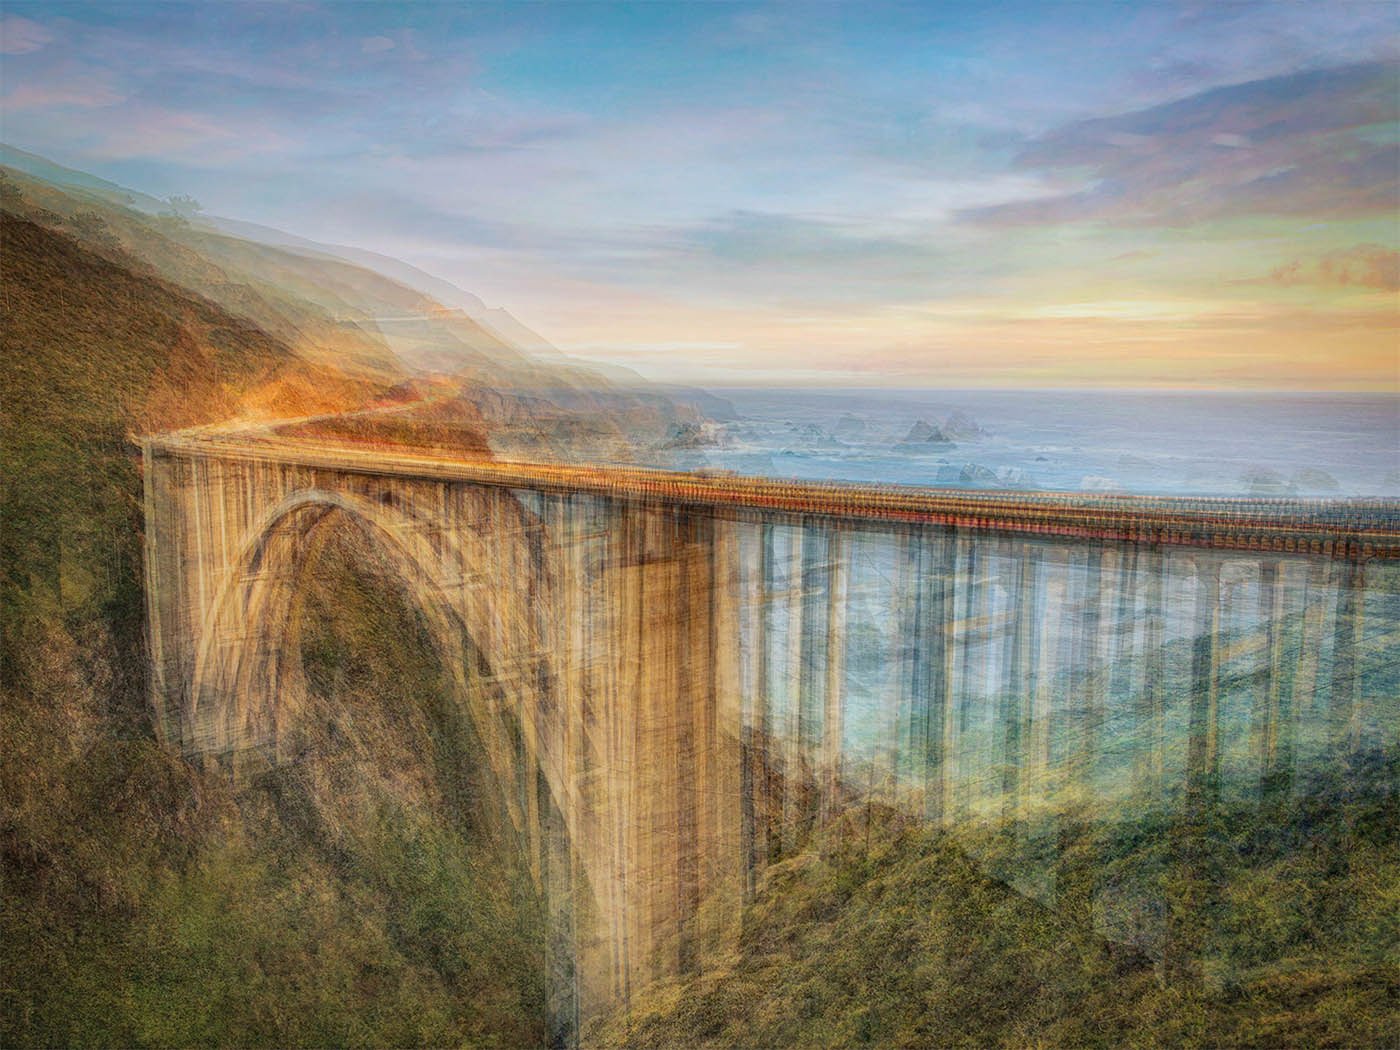 On the Road to Big Sur by Pep Ventosa